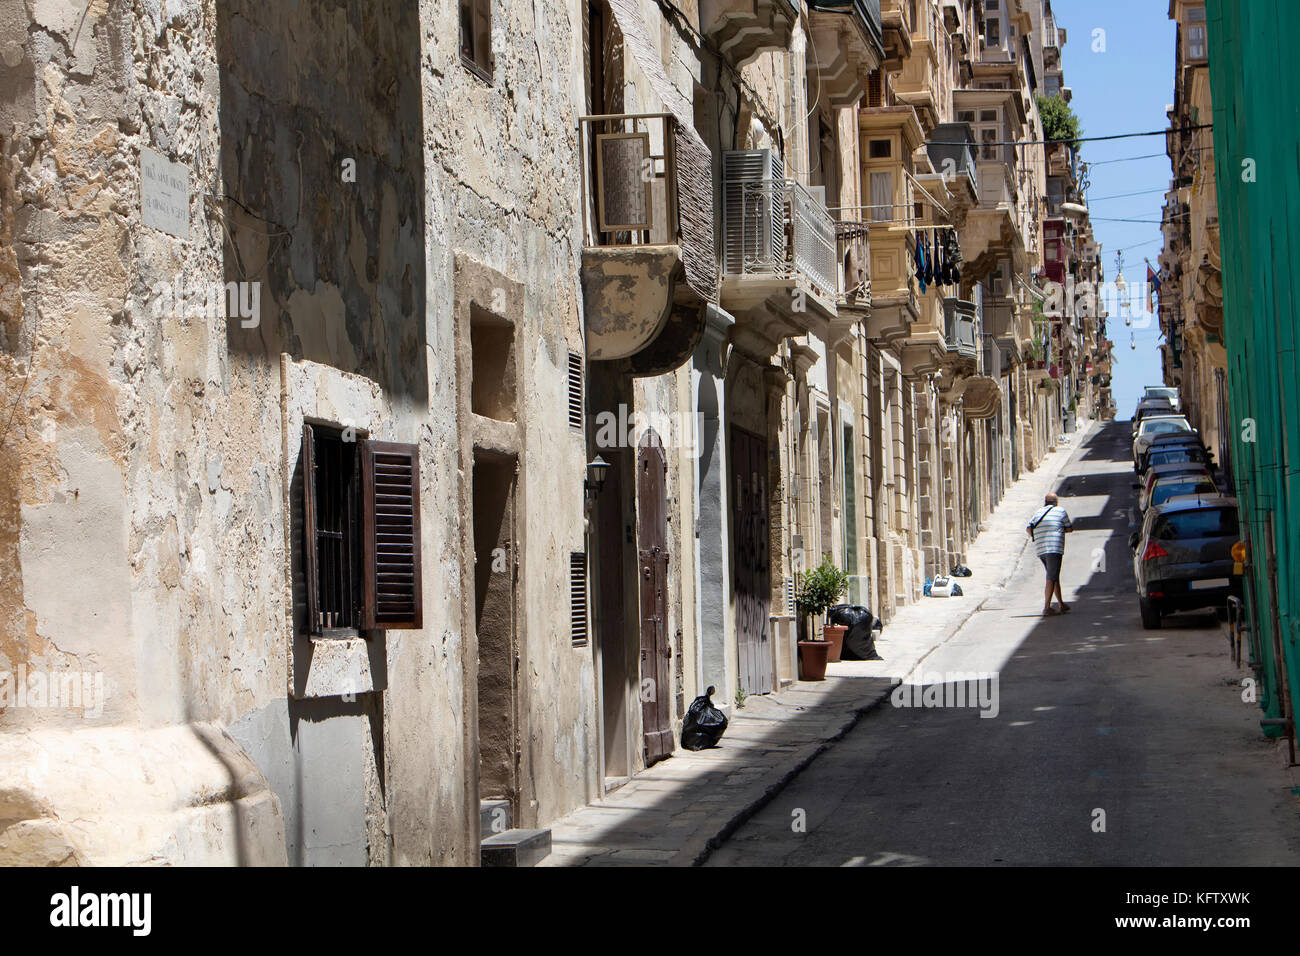 One of the old, historical streets in Valletta / Malta. Image shows architectural style of the city and lifestyle. It's the capital of the Mediterrane Stock Photo